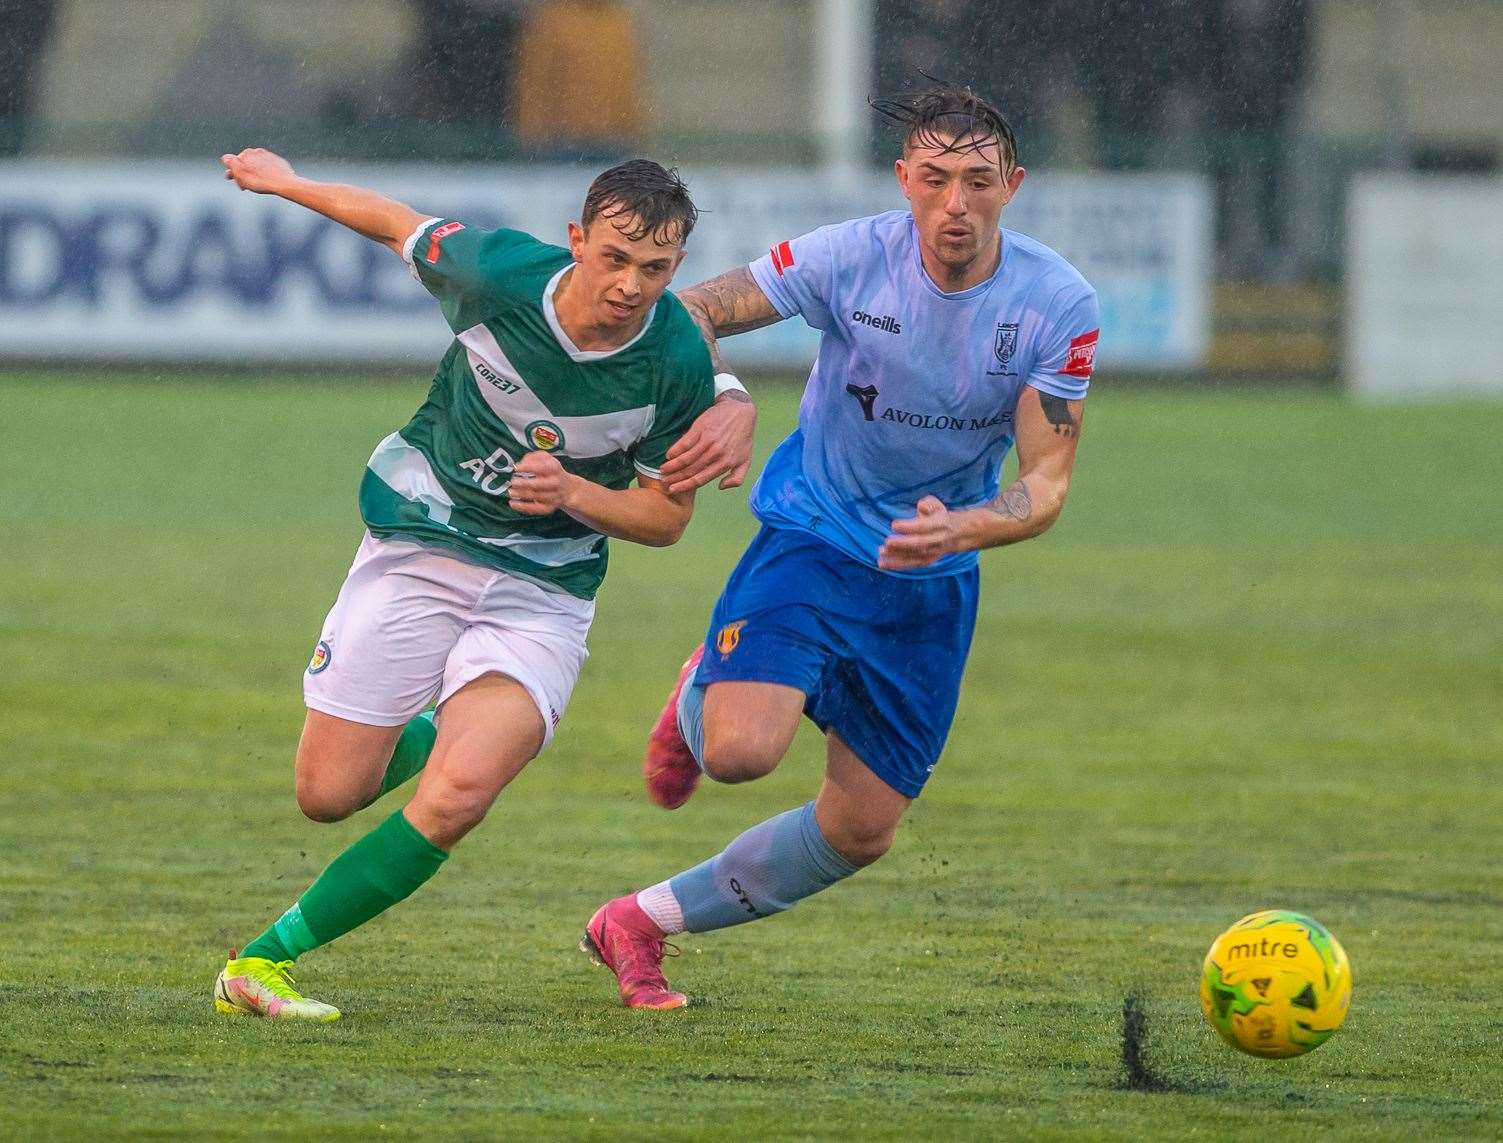 Johan ter Horst is among the many attacking options at Ashford United Picture: Ian Scammell